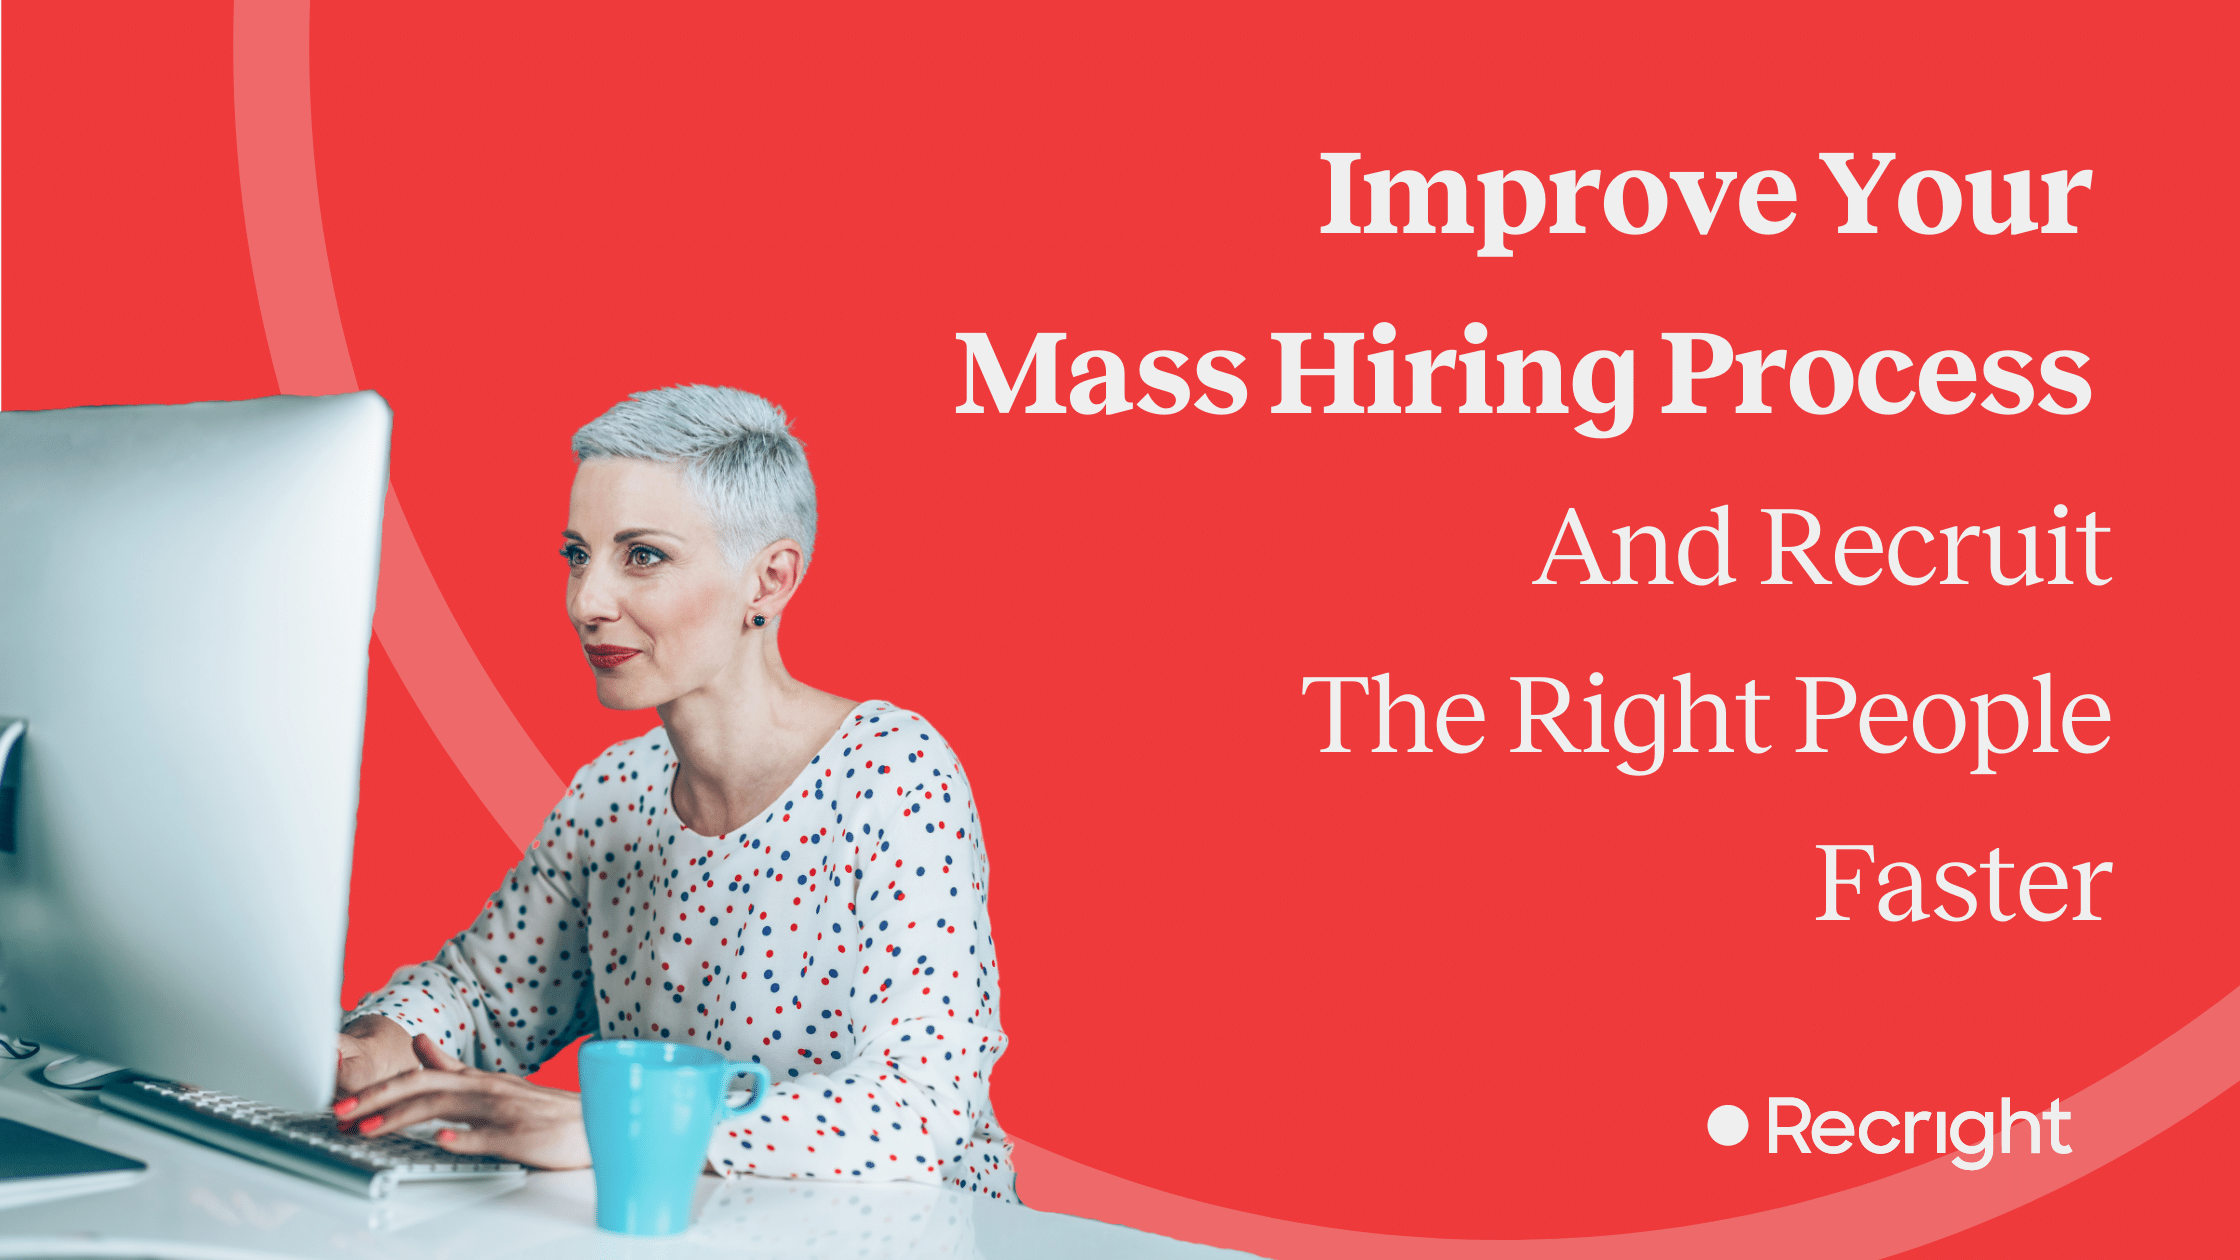 How to improve your mass hiring process & recruit the right people faster